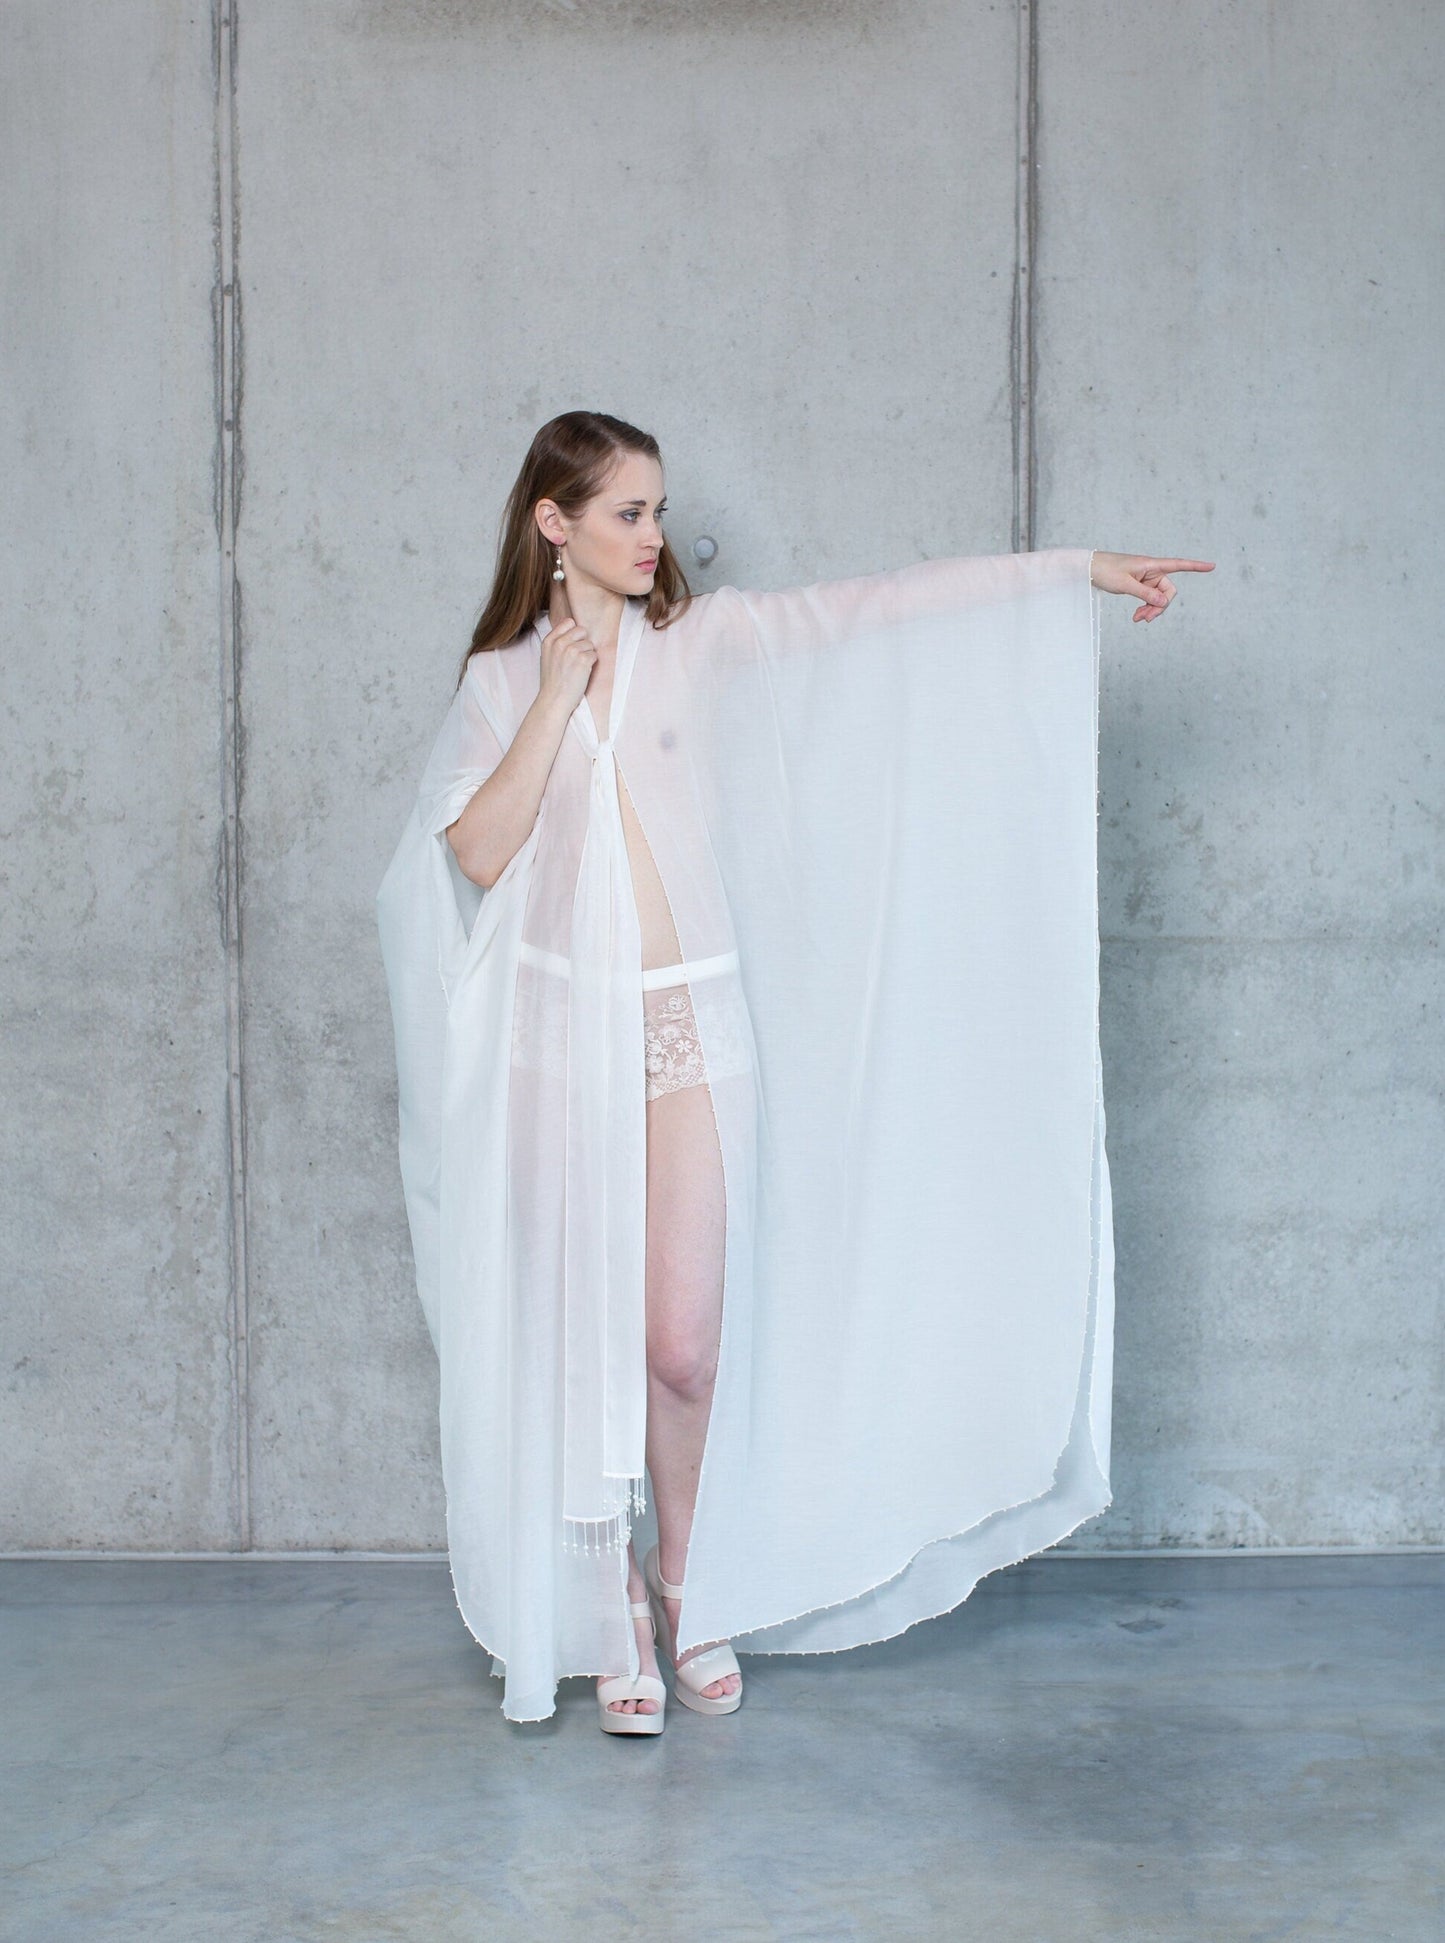 Translucent Pearl Negligee